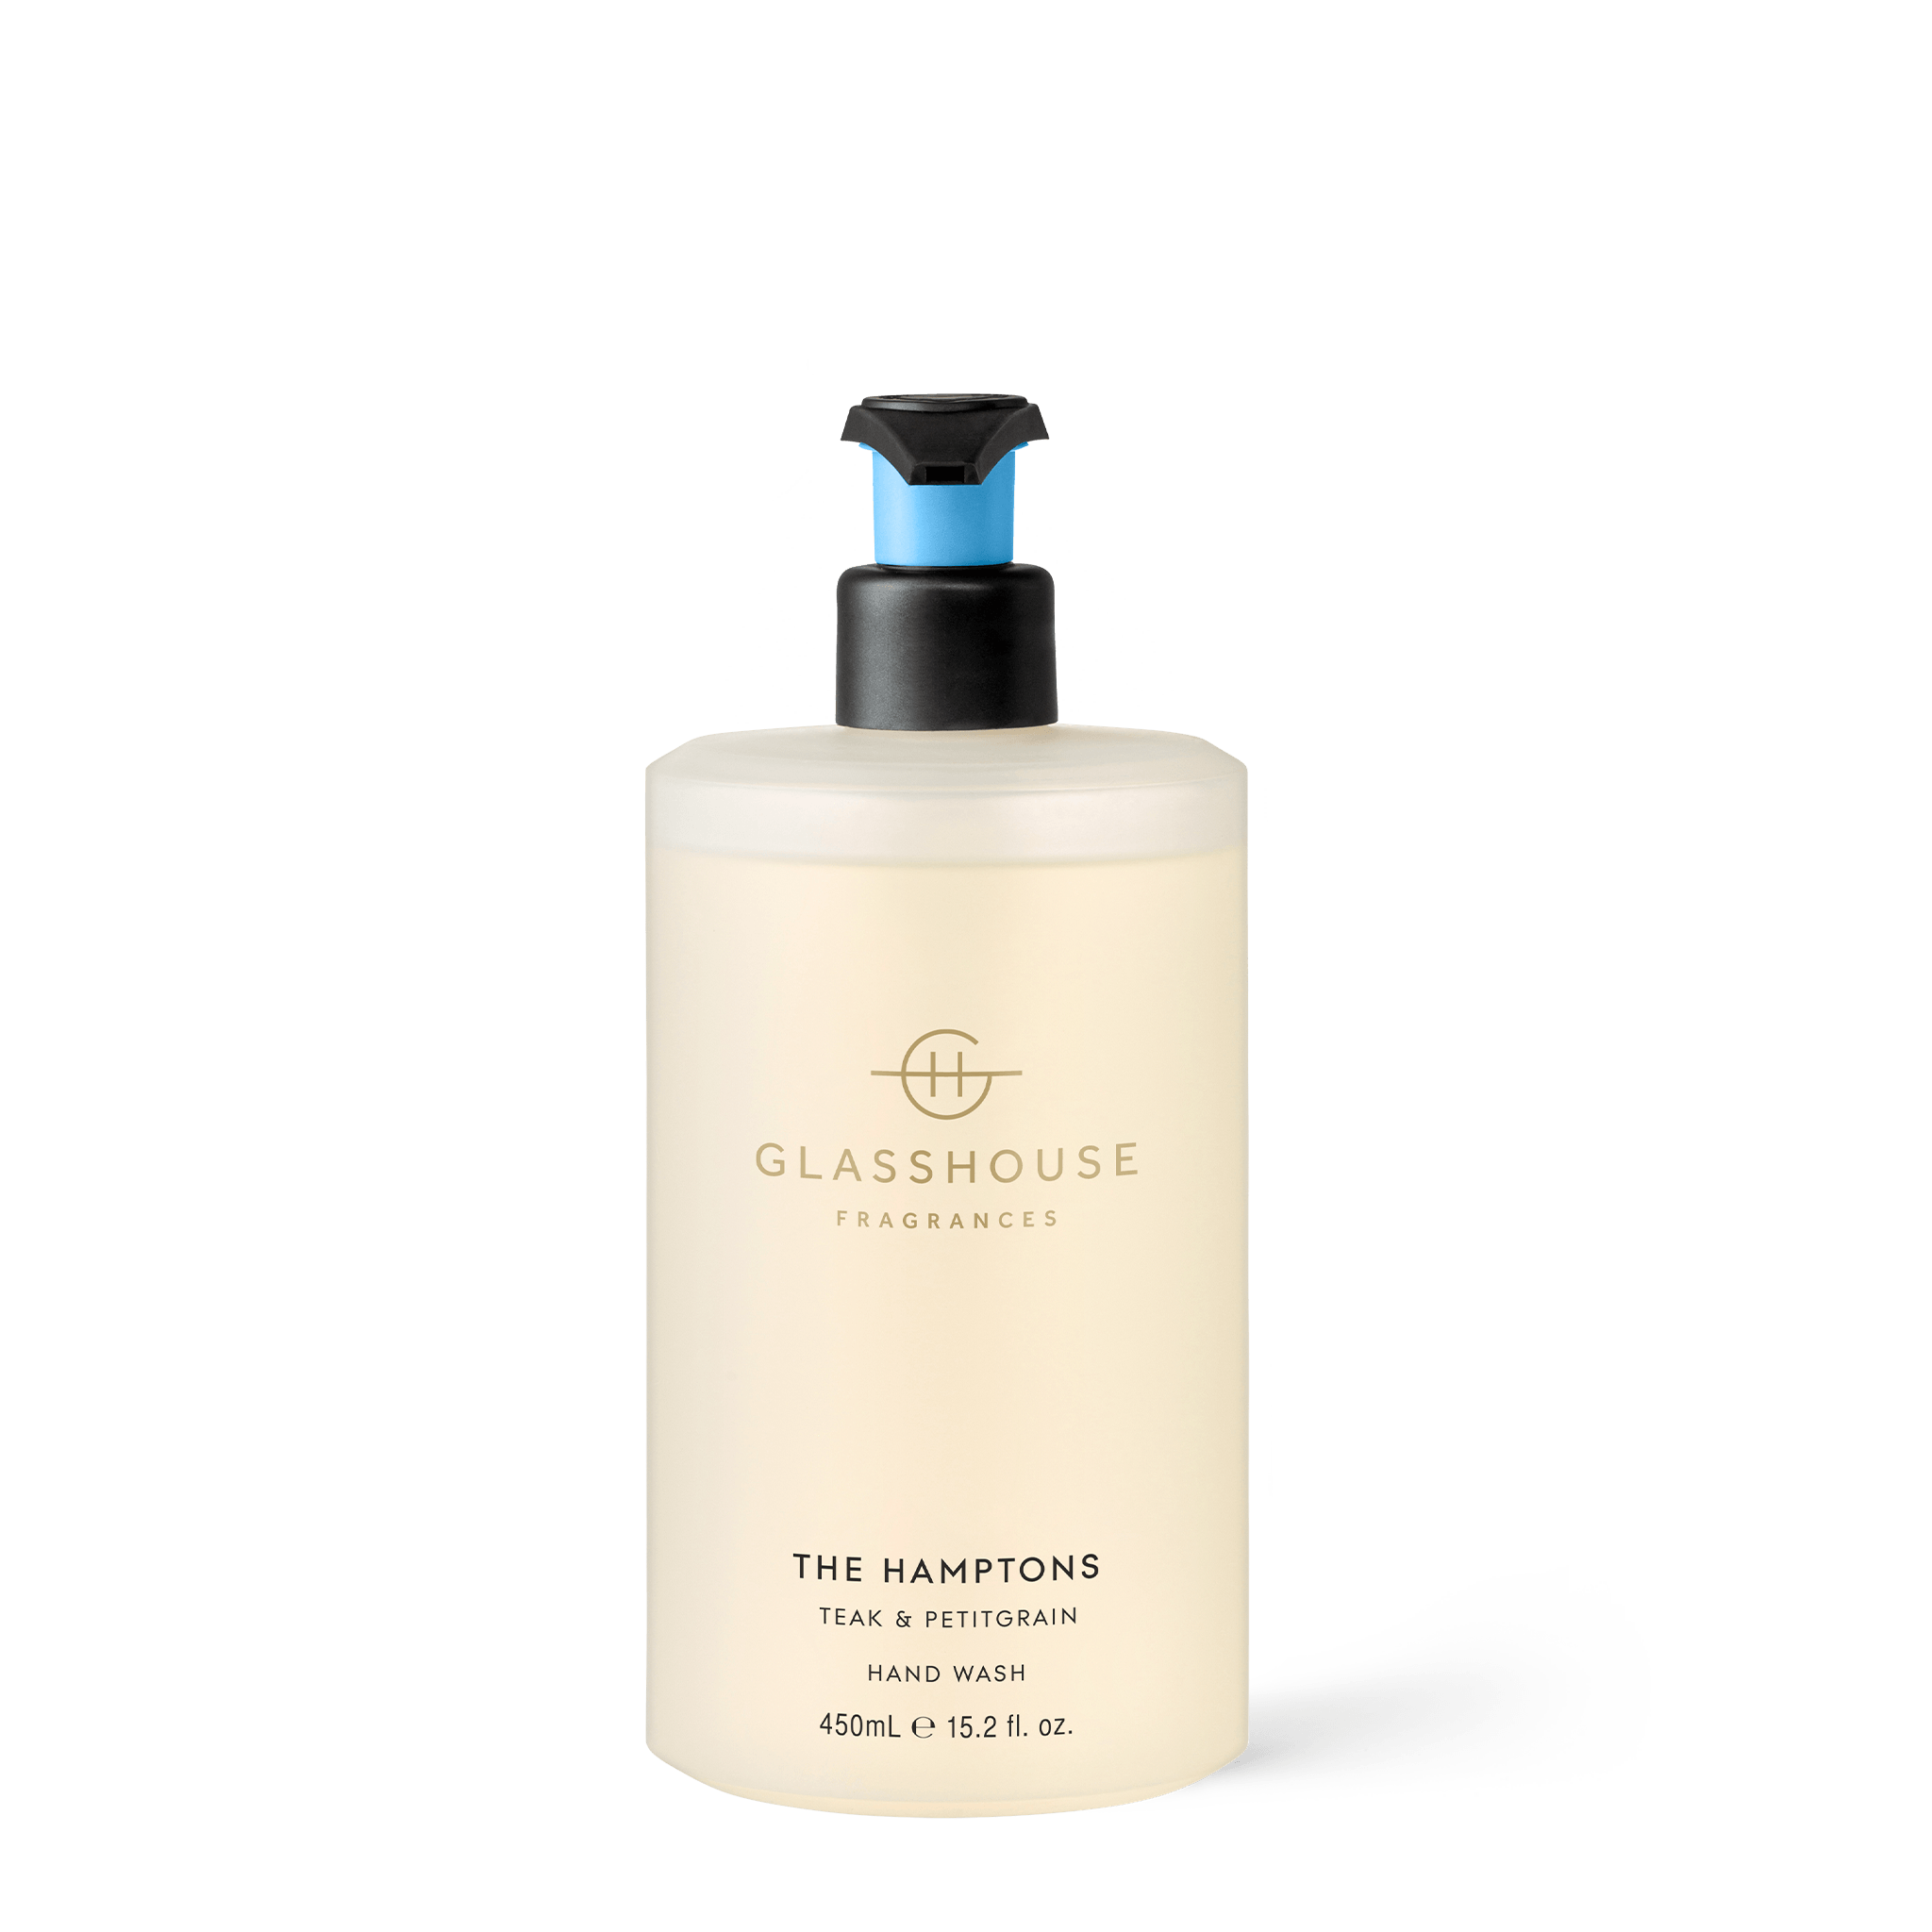 Glasshouse The Hamptons Hand Wash 450ml - Exquisite Laser Clinic